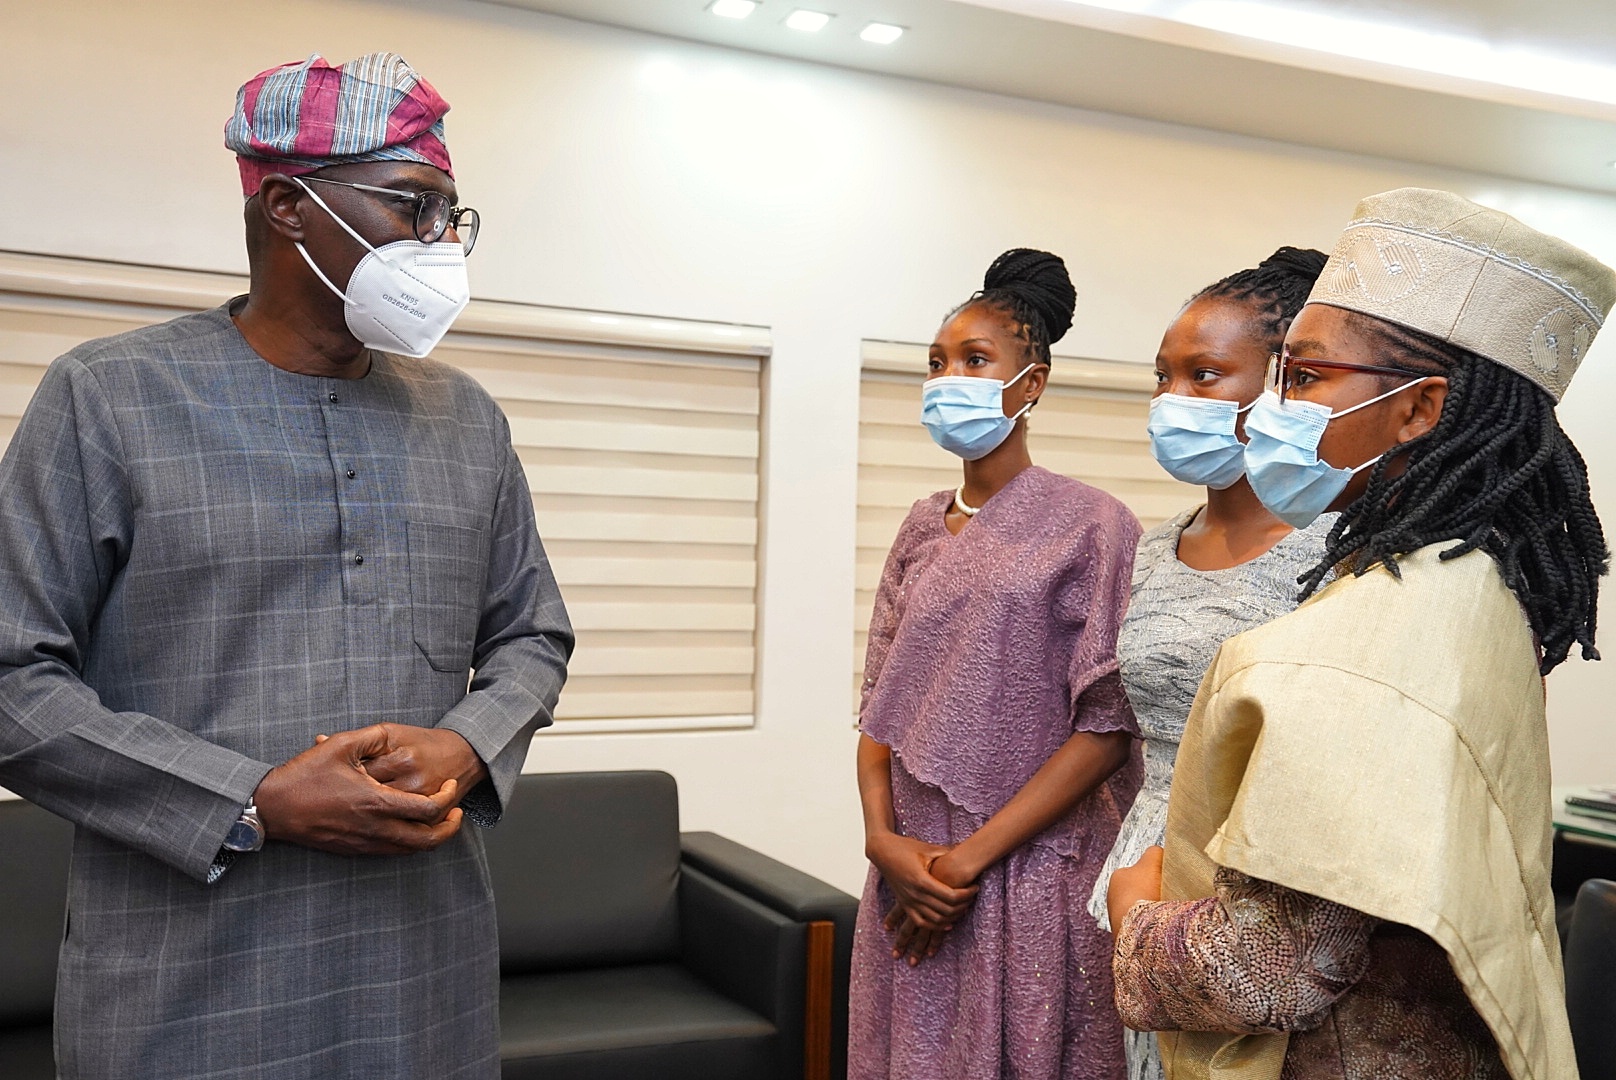 Lagos State Governor, Mr. Babajide Sanwo-Olu (left) interacts with winner of the 2018/2019 spelling Bee competition & the One-Day Governor, Miss Eniola Ajala of Lafiaji Senior High School (right), her cabinet members, Commissioner for Education, Miss Eunice Adedotun and One-Day Deputy Governor, Miss Grace Ikhariale of TinCan Island Senior High School, during the One-Day Governor’s visit to the Lagos House, Alausa, Ikeja, on Friday, March 26, 2021.